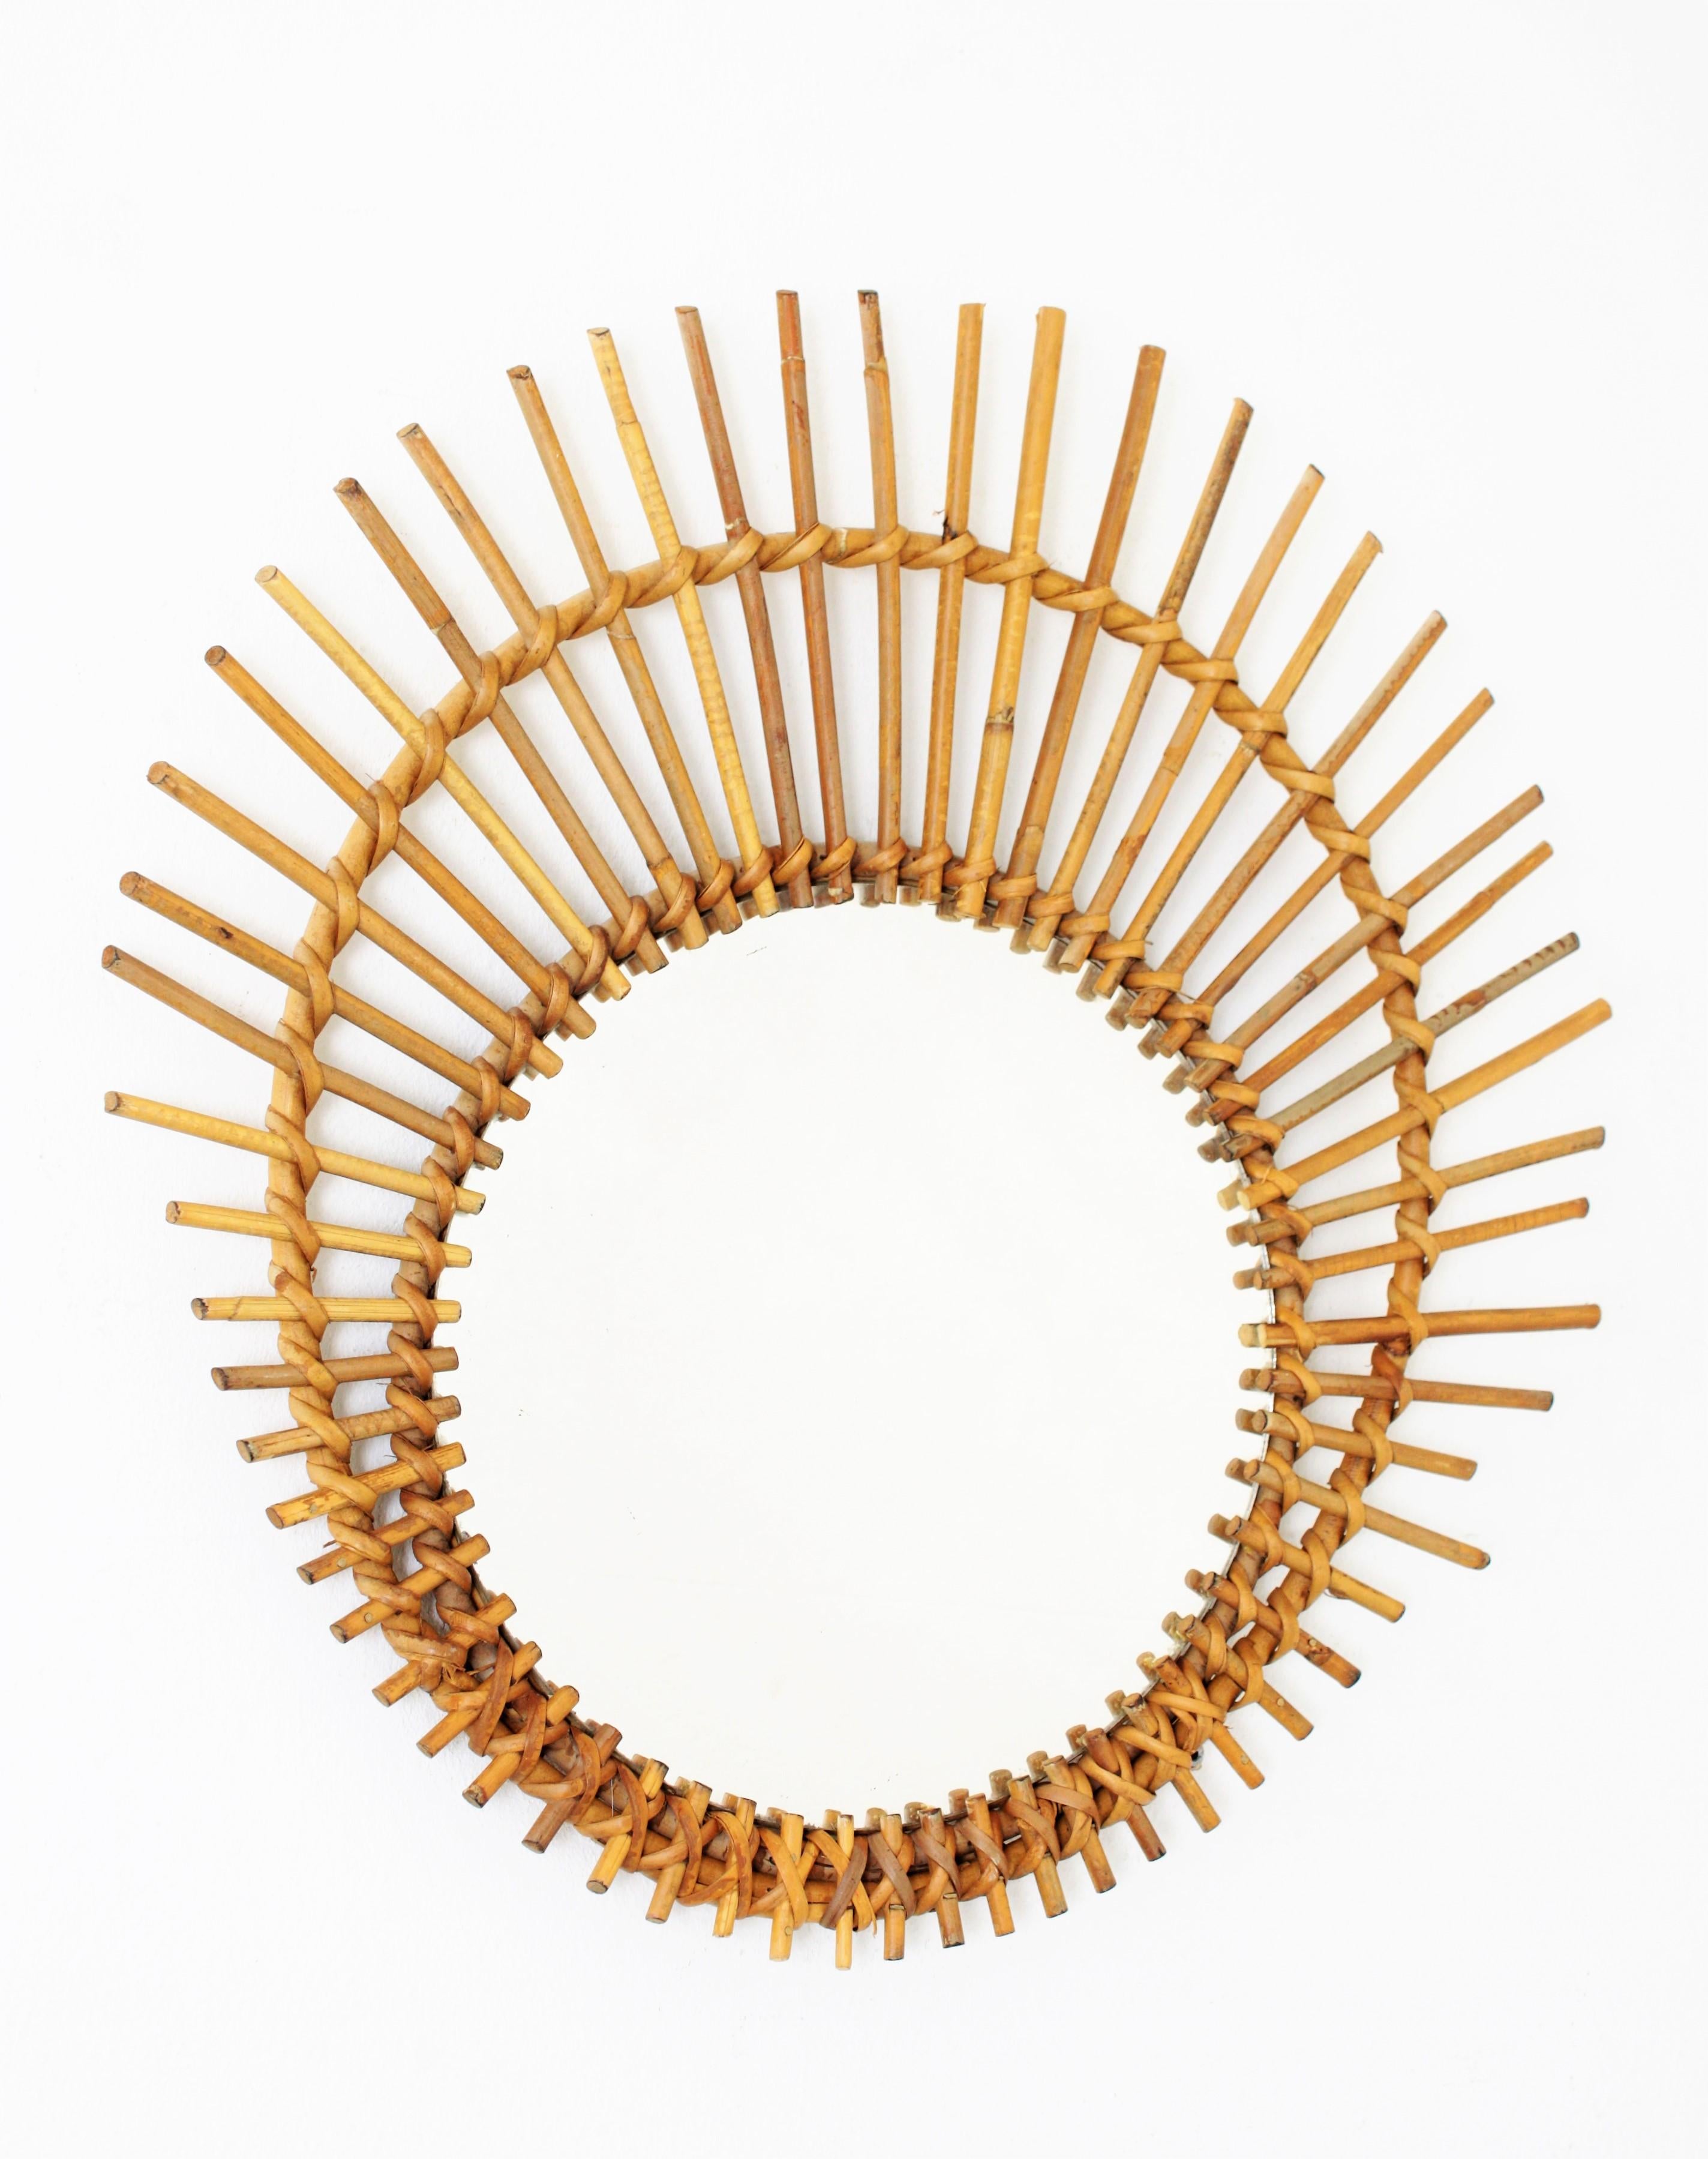 Vintage rattan or wicker ovoid shaped asymmetric sunburst mirror. This piece has all the taste of the Mediterranean coast style and it is in excellent vintage condition, France, 1960s. Glass diameter: 29.5cm.
Beautiful to place in a wall decoration